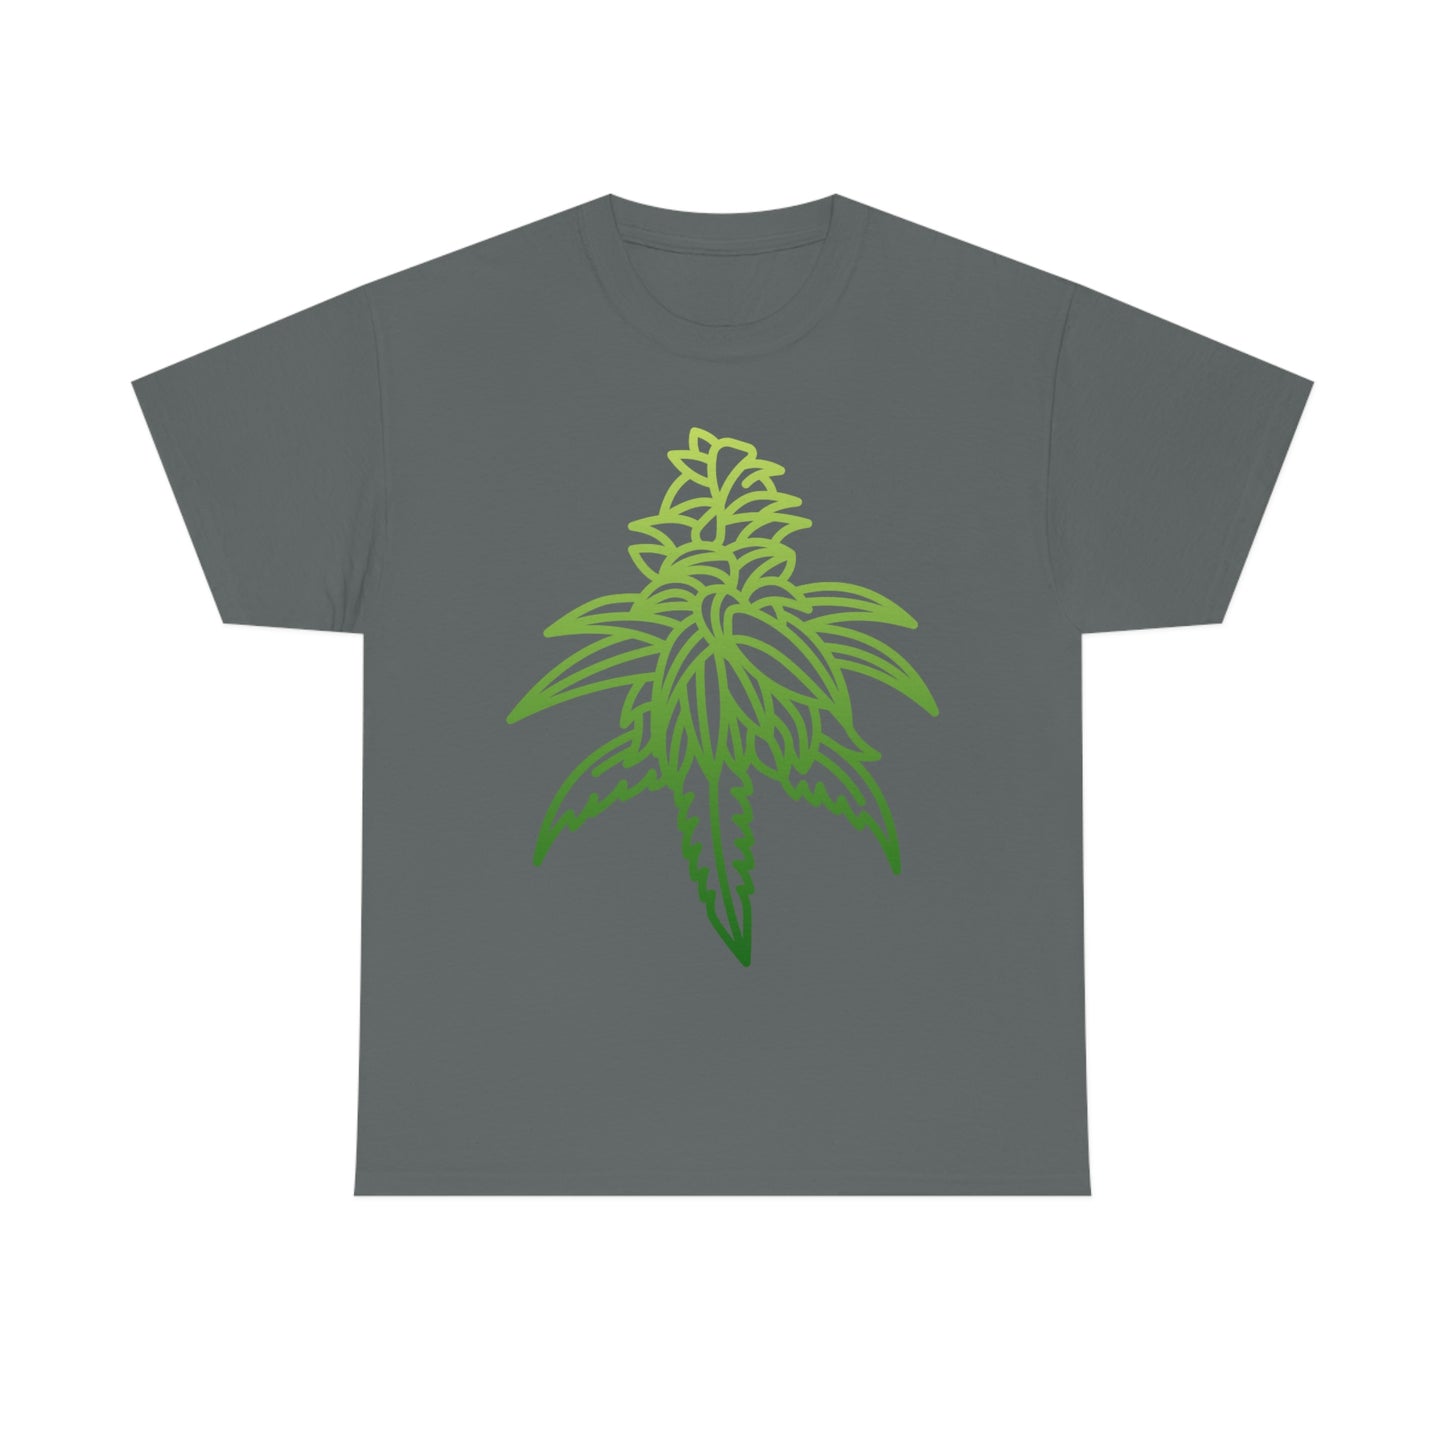 A sour diesel cannabis tee that shows a gradient outline of a cannabis nug going from dark green to lime green.